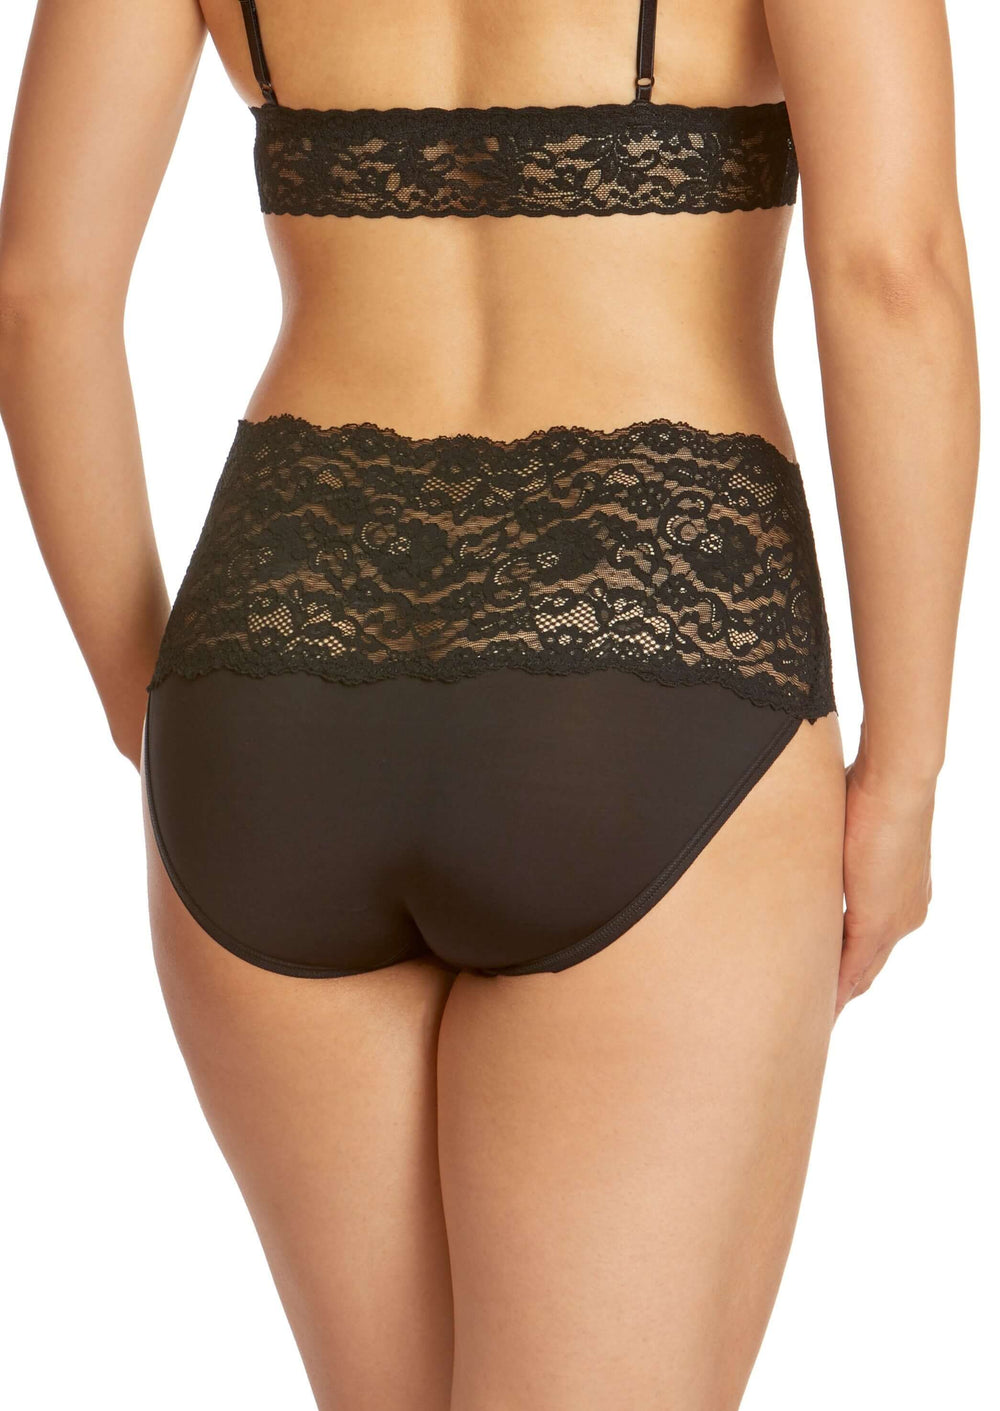 Silky Skin High Rise Panty - Black | Hanky Panky | Style # 8641 |Made in the USA | Classy Cozy Cool Women’s Clothing Boutique